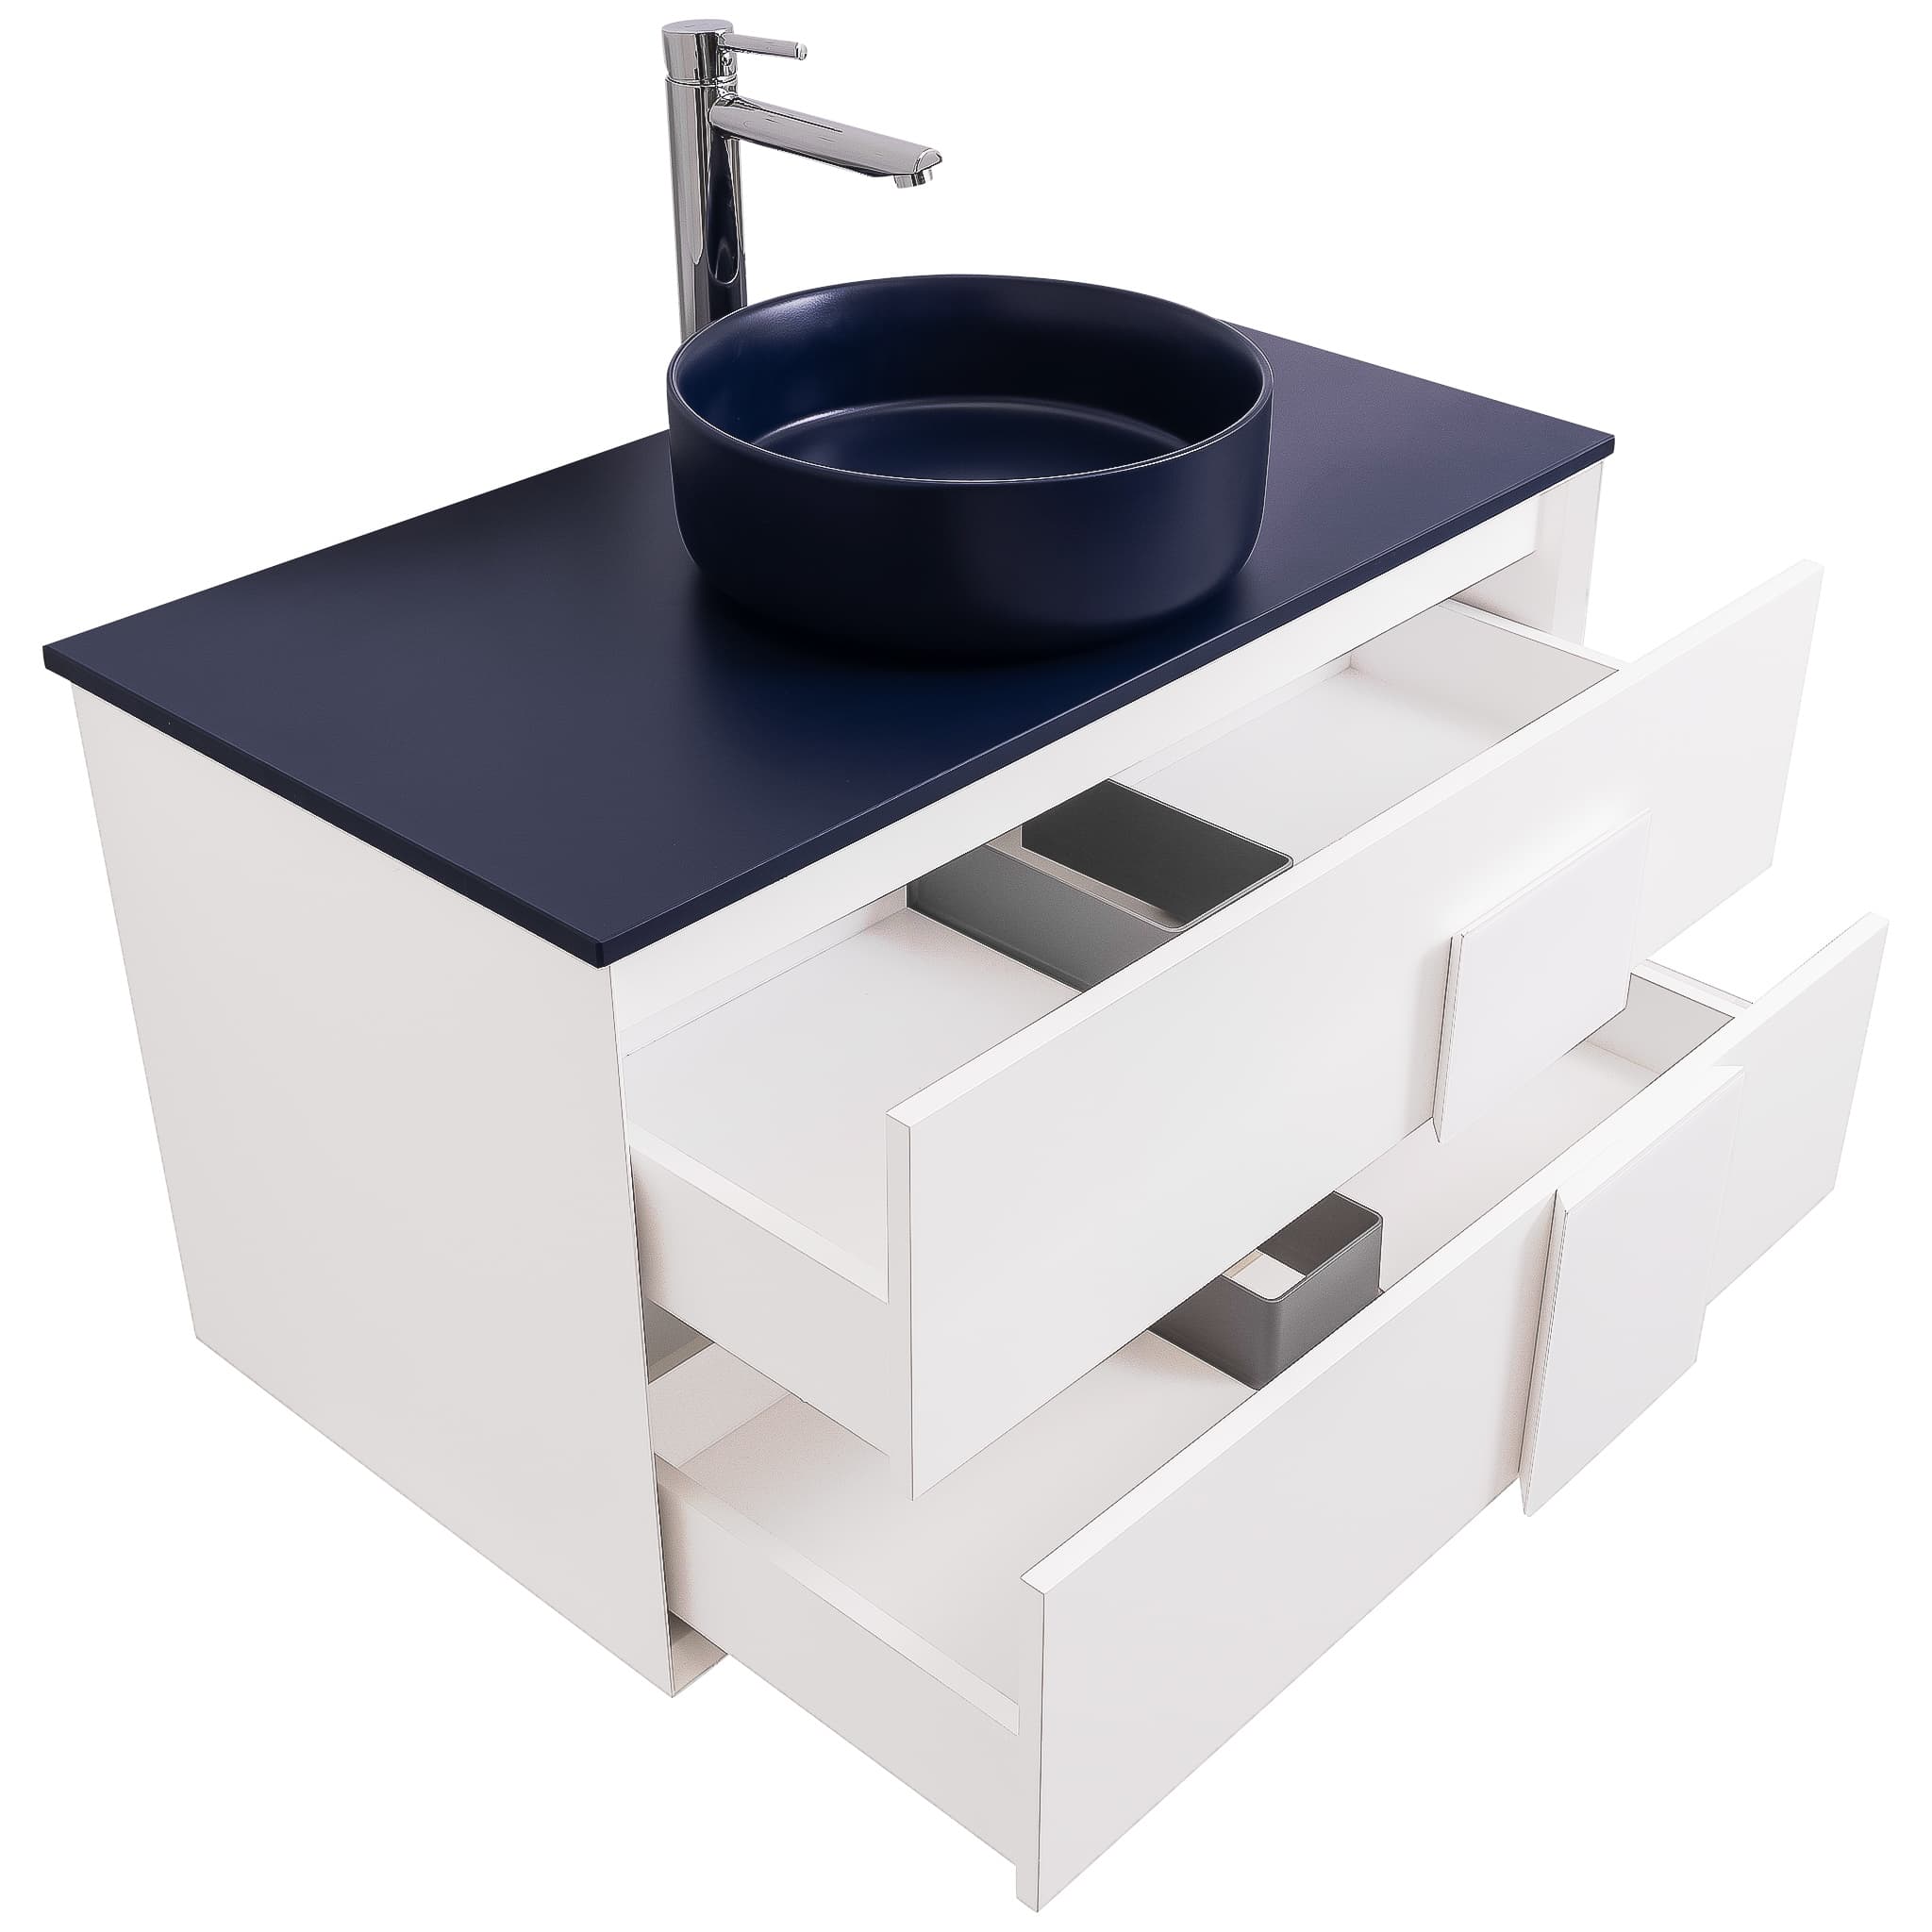 Piazza 31.5 Matte White With White Handle Cabinet, Ares Navy Blue Top and Ares Navy Blue Ceramic Basin, Wall Mounted Modern Vanity Set